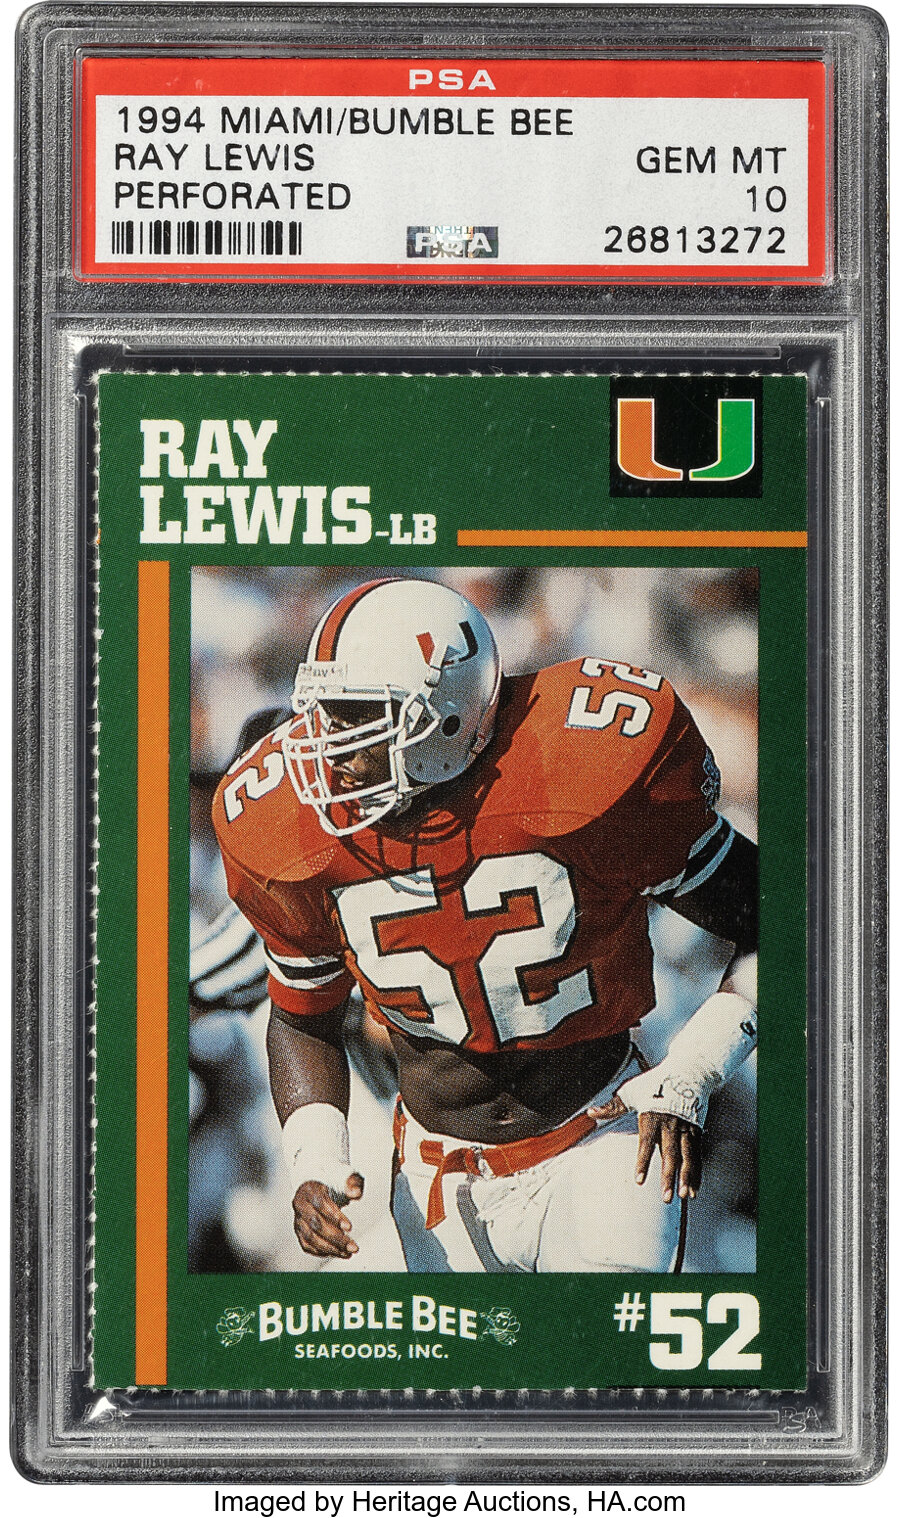 1994 Bumble Bee Miami Hurricanes Ray Lewis (Perforated) PSA Gem Mint 10